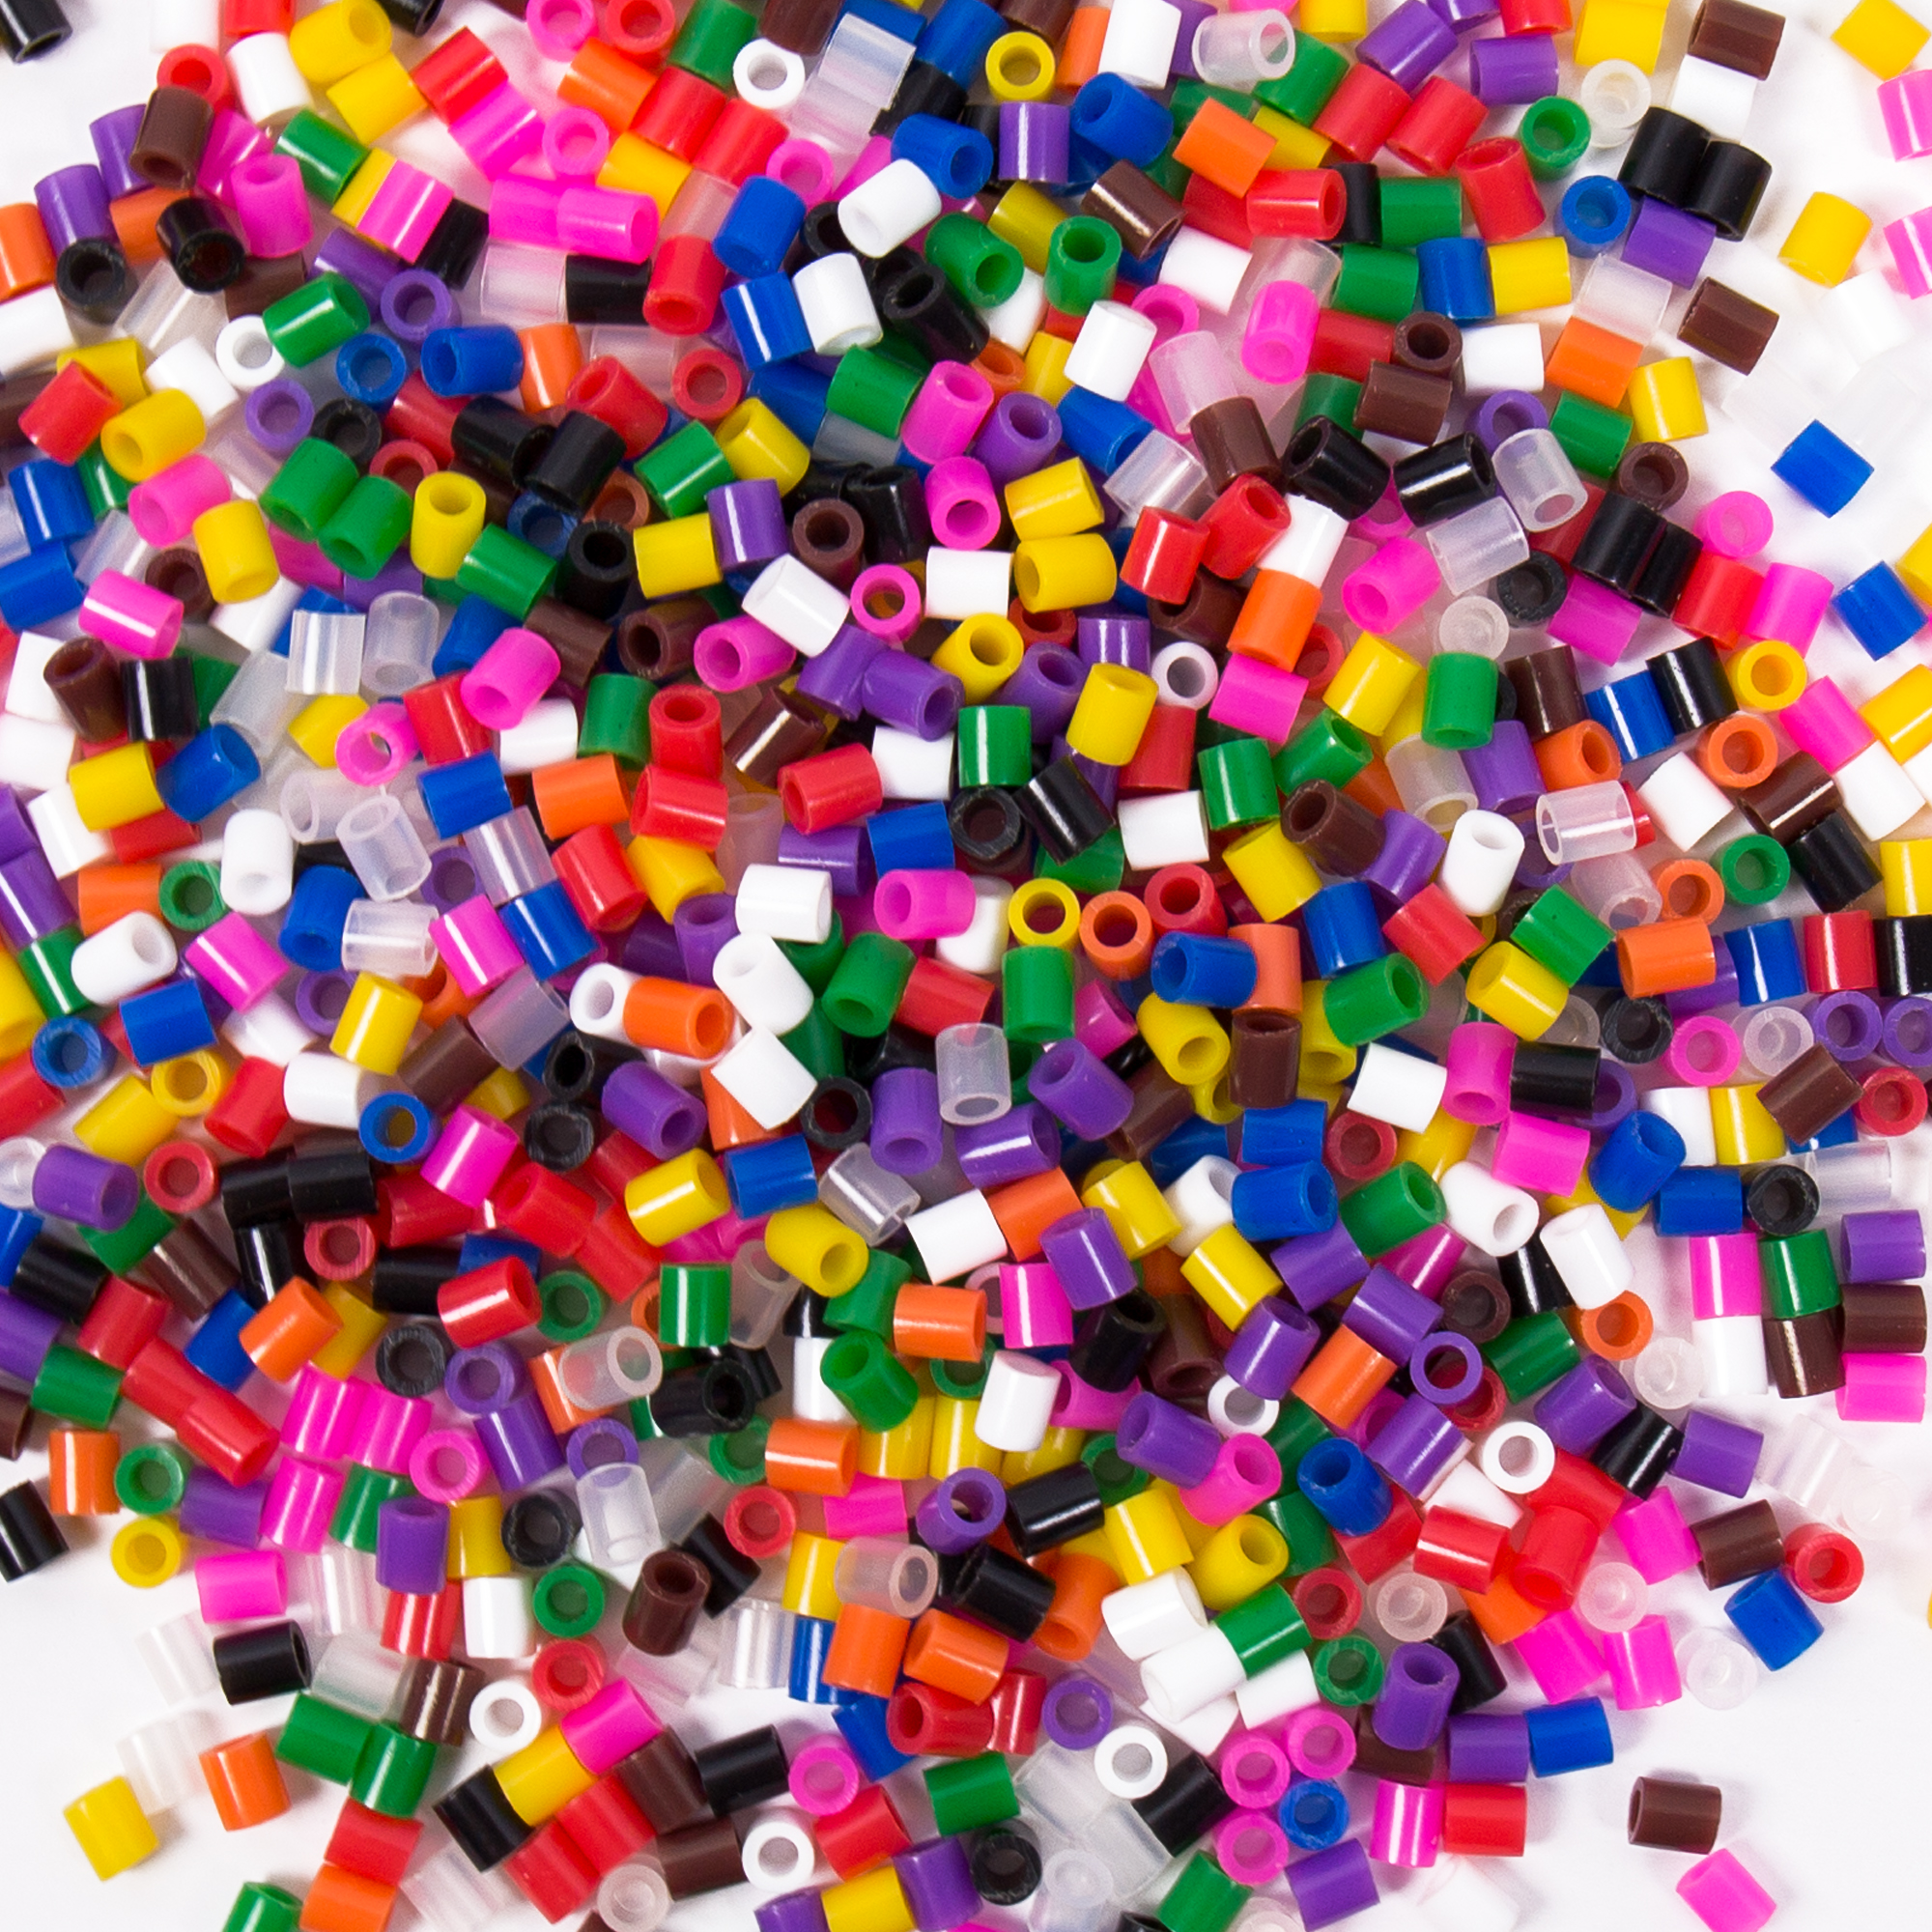 Go Create Melty Beads Variety Pack, Colorful Bead Art, Arts & Crafts - image 3 of 4